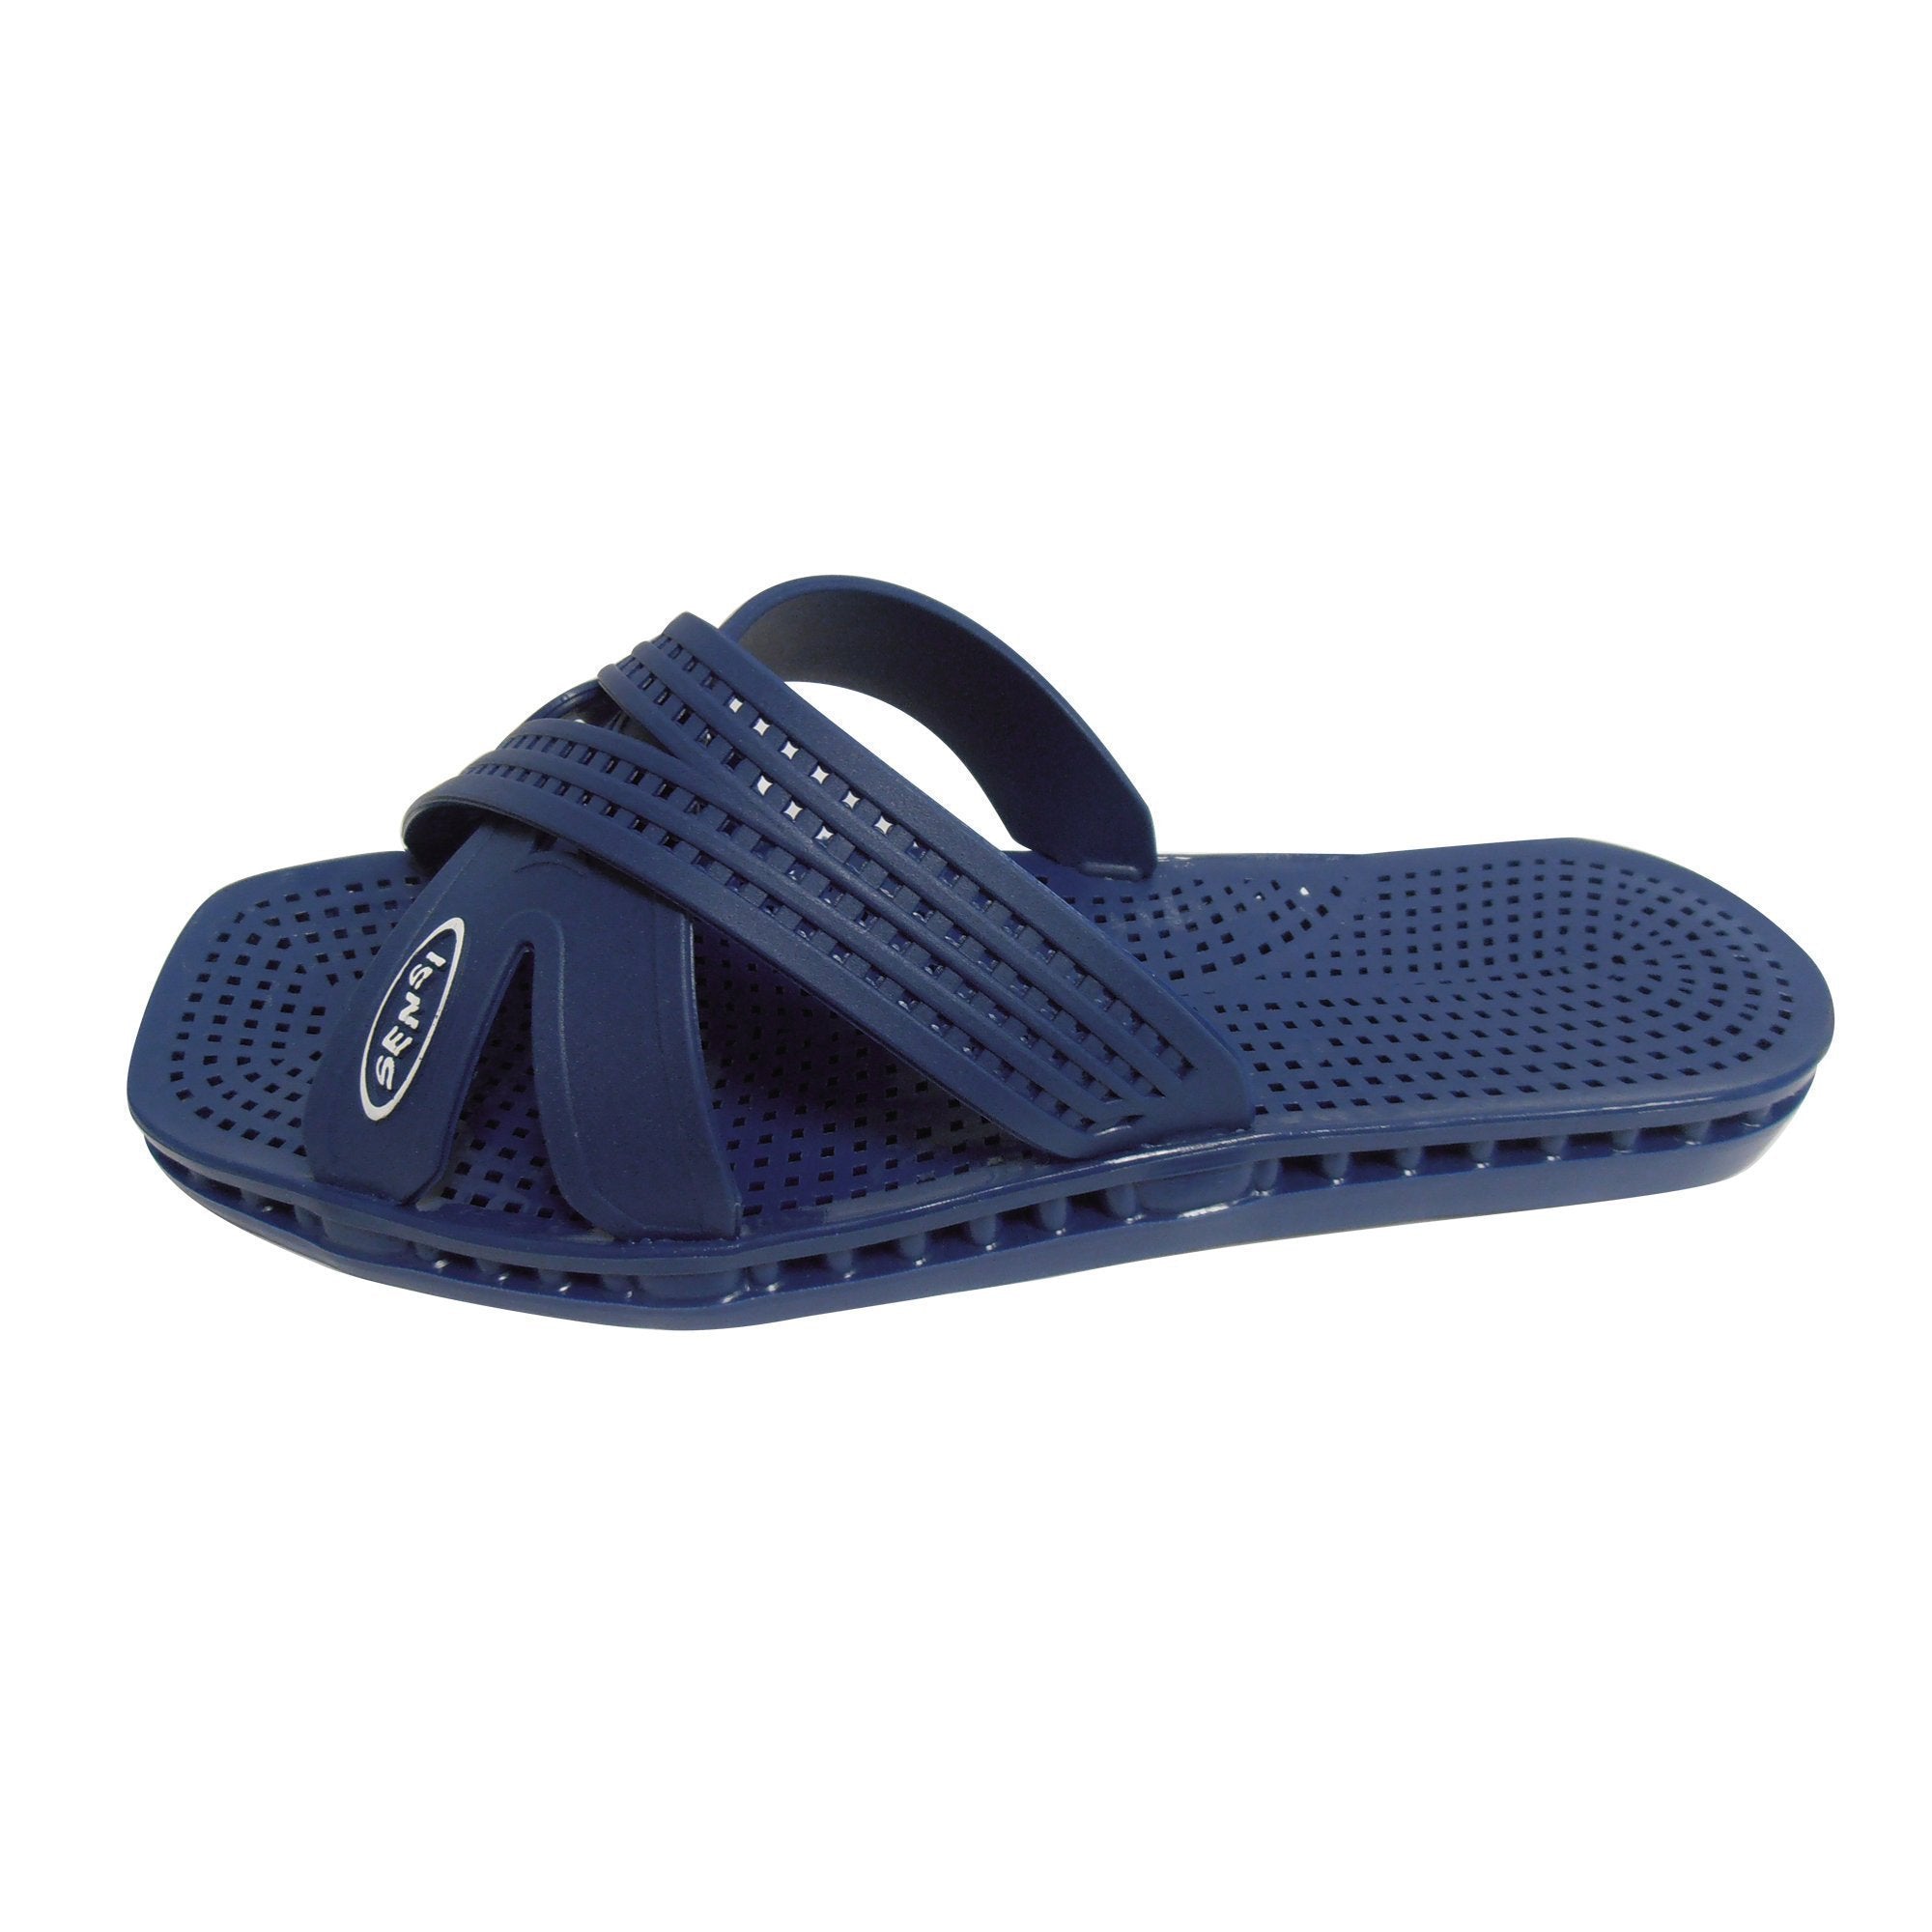 Sandals & Slippers Size 10 / Navy Sensi Sandals, Messico City